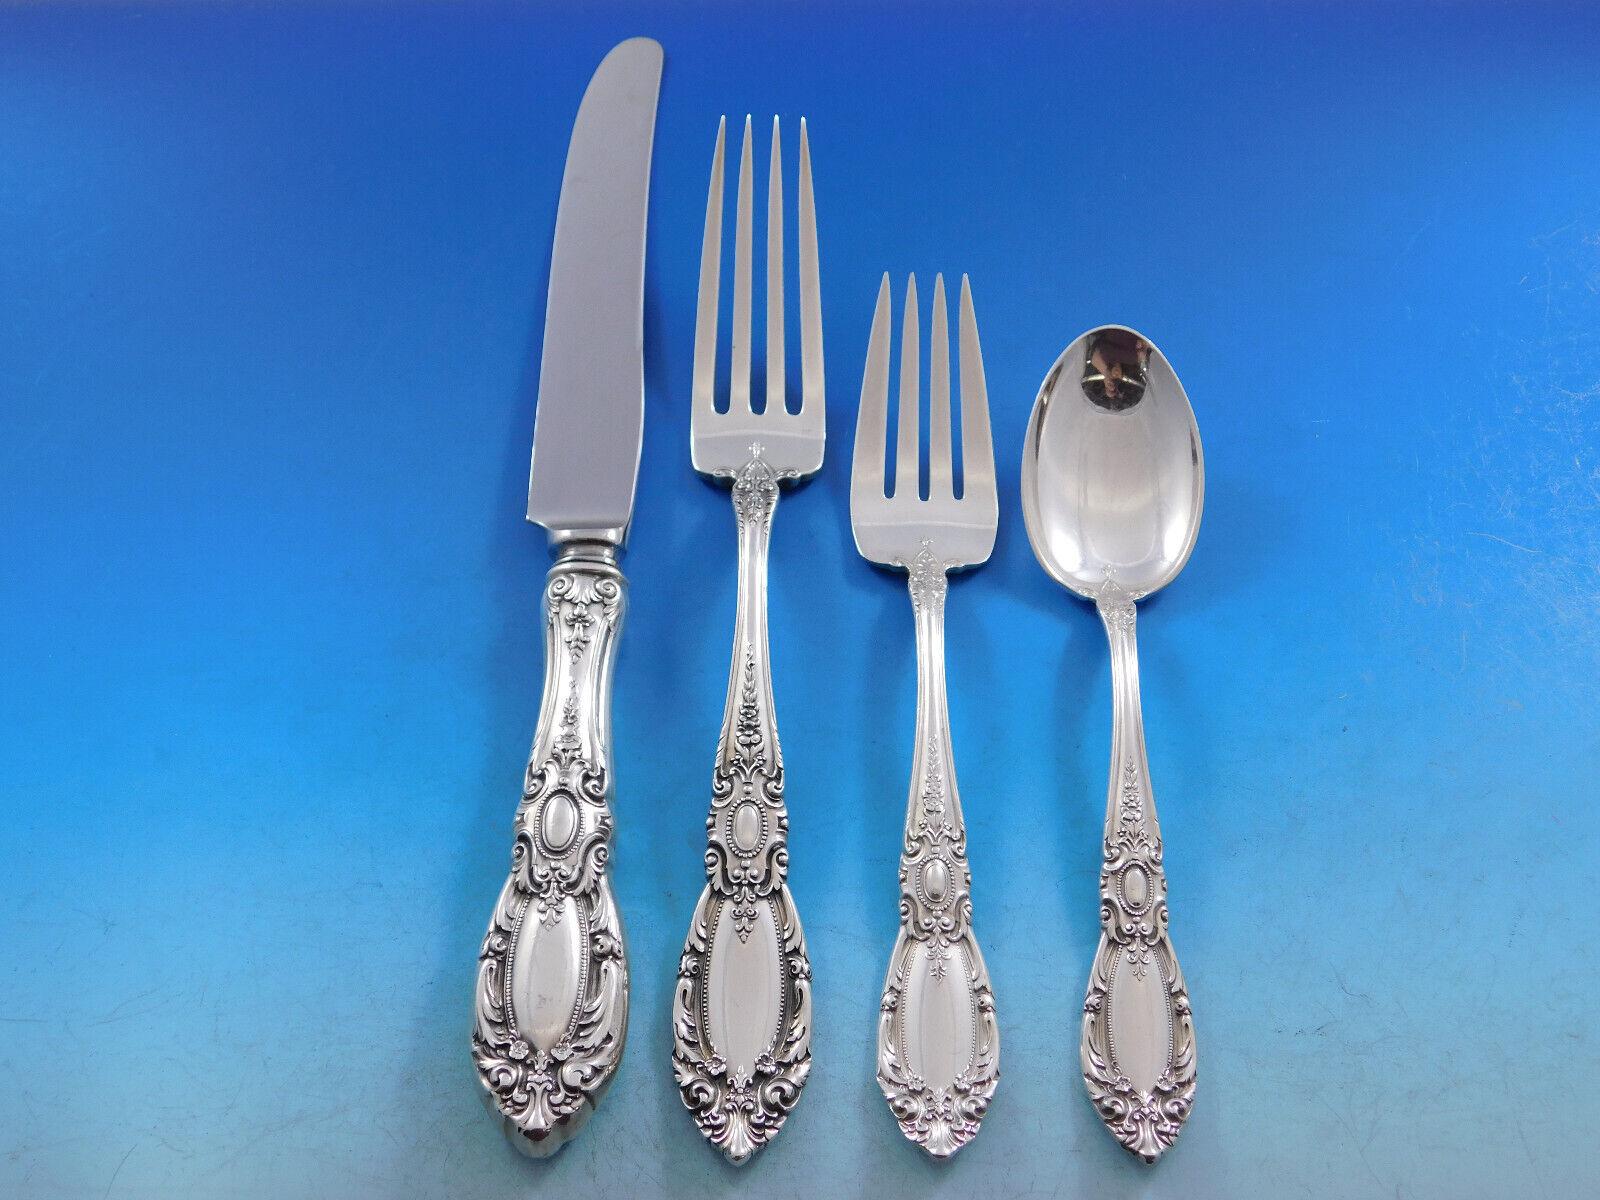 King Richard by Towle Sterling Silver Flatware Set 12 Service 108 Pc Dinner Size In Excellent Condition For Sale In Big Bend, WI